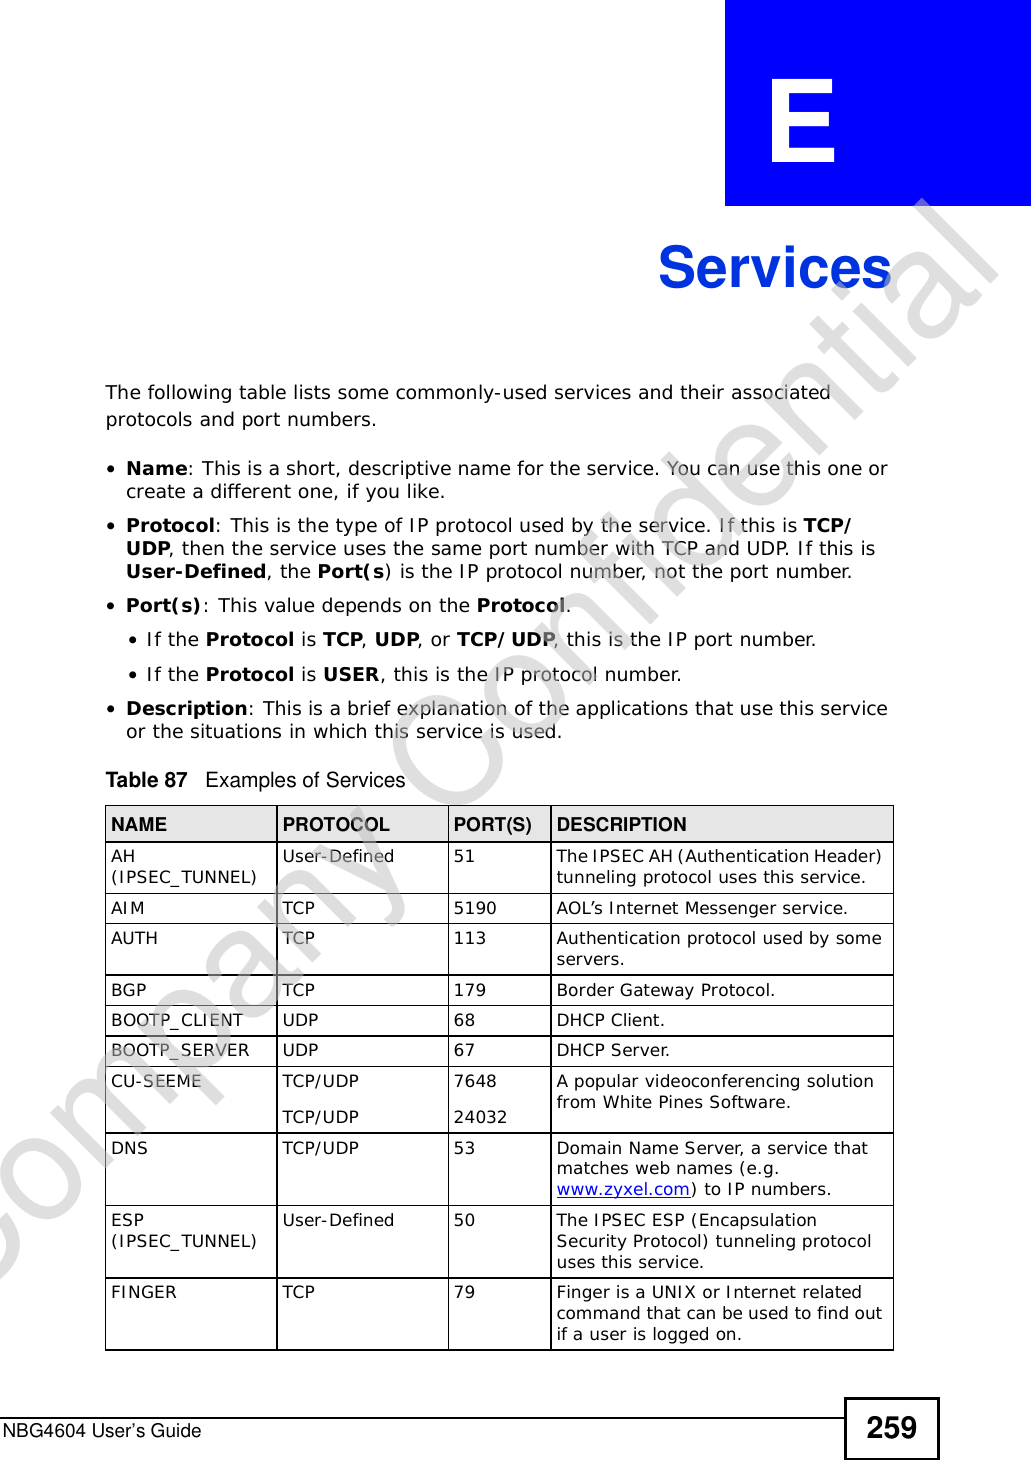 NBG4604 User’s Guide 259APPENDIX  E ServicesThe following table lists some commonly-used services and their associated protocols and port numbers.•Name: This is a short, descriptive name for the service. You can use this one or create a different one, if you like.•Protocol: This is the type of IP protocol used by the service. If this is TCP/UDP, then the service uses the same port number with TCP and UDP. If this is User-Defined, the Port(s) is the IP protocol number, not the port number.•Port(s): This value depends on the Protocol.•If the Protocol is TCP,UDP, or TCP/UDP, this is the IP port number.•If the Protocol is USER, this is the IP protocol number.•Description: This is a brief explanation of the applications that use this service or the situations in which this service is used.Table 87   Examples of ServicesNAME PROTOCOL PORT(S) DESCRIPTIONAH (IPSEC_TUNNEL) User-Defined 51 The IPSEC AH (Authentication Header) tunneling protocol uses this service.AIM TCP 5190 AOL’s Internet Messenger service.AUTH TCP 113 Authentication protocol used by some servers.BGP TCP 179 Border Gateway Protocol.BOOTP_CLIENT UDP 68 DHCP Client.BOOTP_SERVER UDP 67 DHCP Server.CU-SEEME TCP/UDPTCP/UDP 764824032A popular videoconferencing solution from White Pines Software.DNS TCP/UDP 53 Domain Name Server, a service that matches web names (e.g. www.zyxel.com) to IP numbers.ESP(IPSEC_TUNNEL) User-Defined 50 The IPSEC ESP (Encapsulation Security Protocol) tunneling protocol uses this service.FINGER TCP 79 Finger is a UNIX or Internet related command that can be used to find out if a user is logged on.Company Confidential